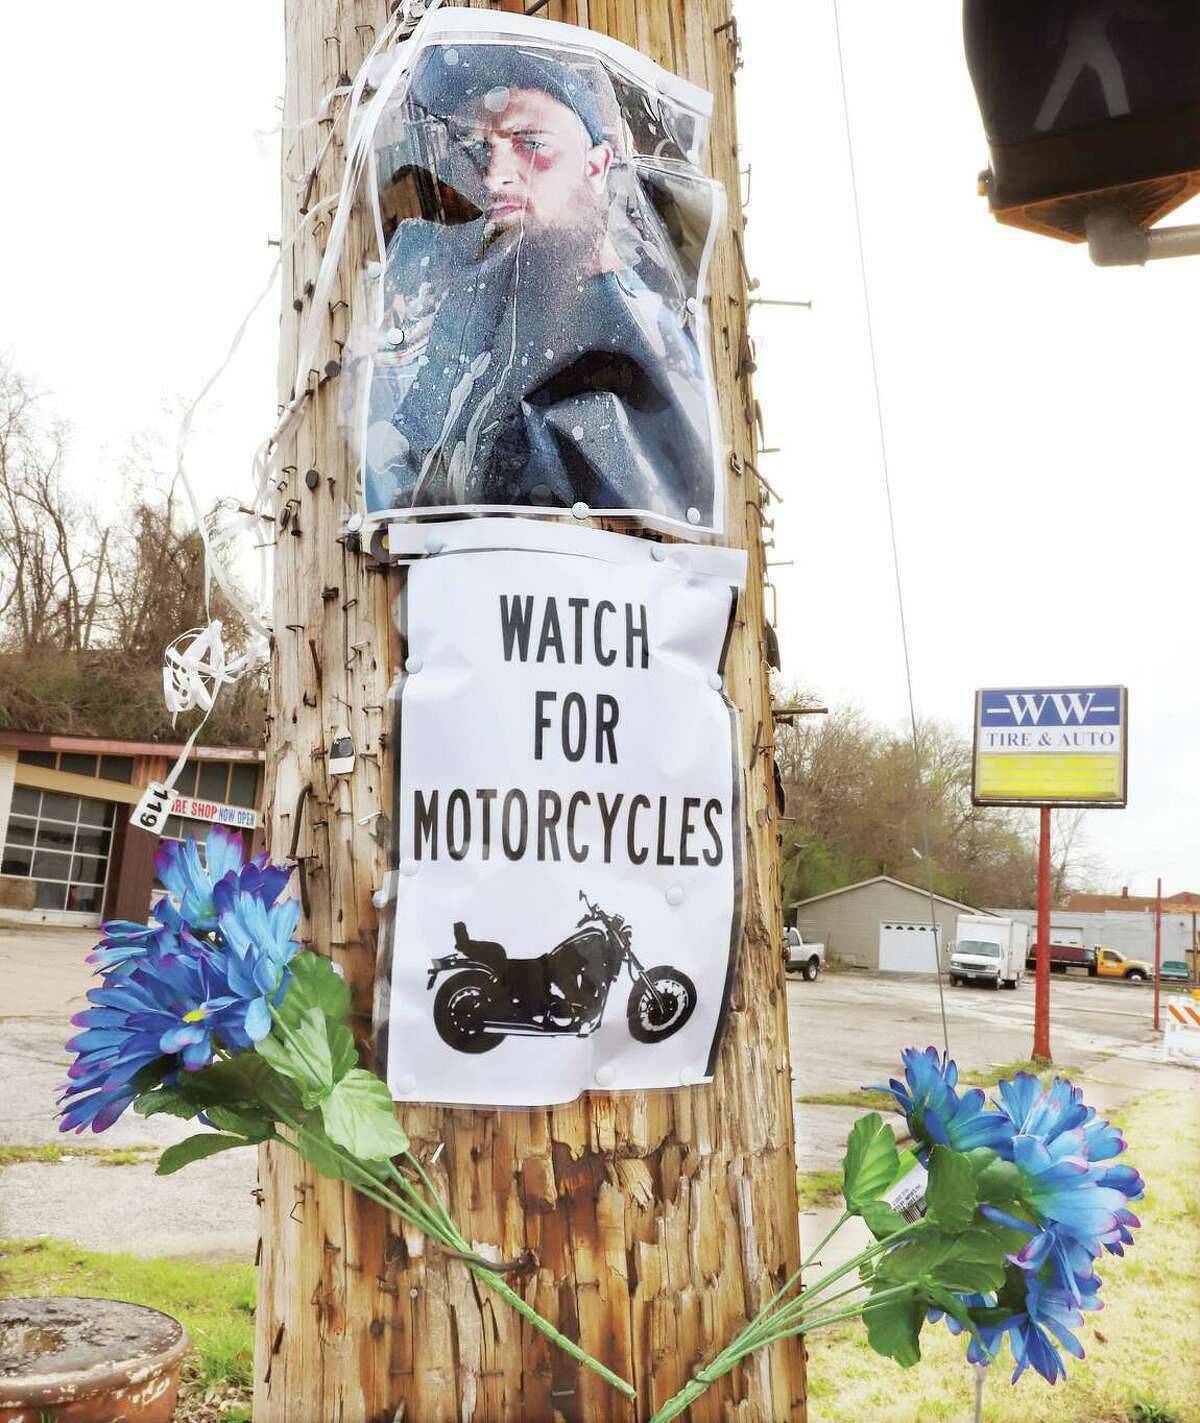 A memorial was created in Alton for motorcyclist Nicholas West of Wood River, who died in an April collision at East Broadway Avenue and Main Street.